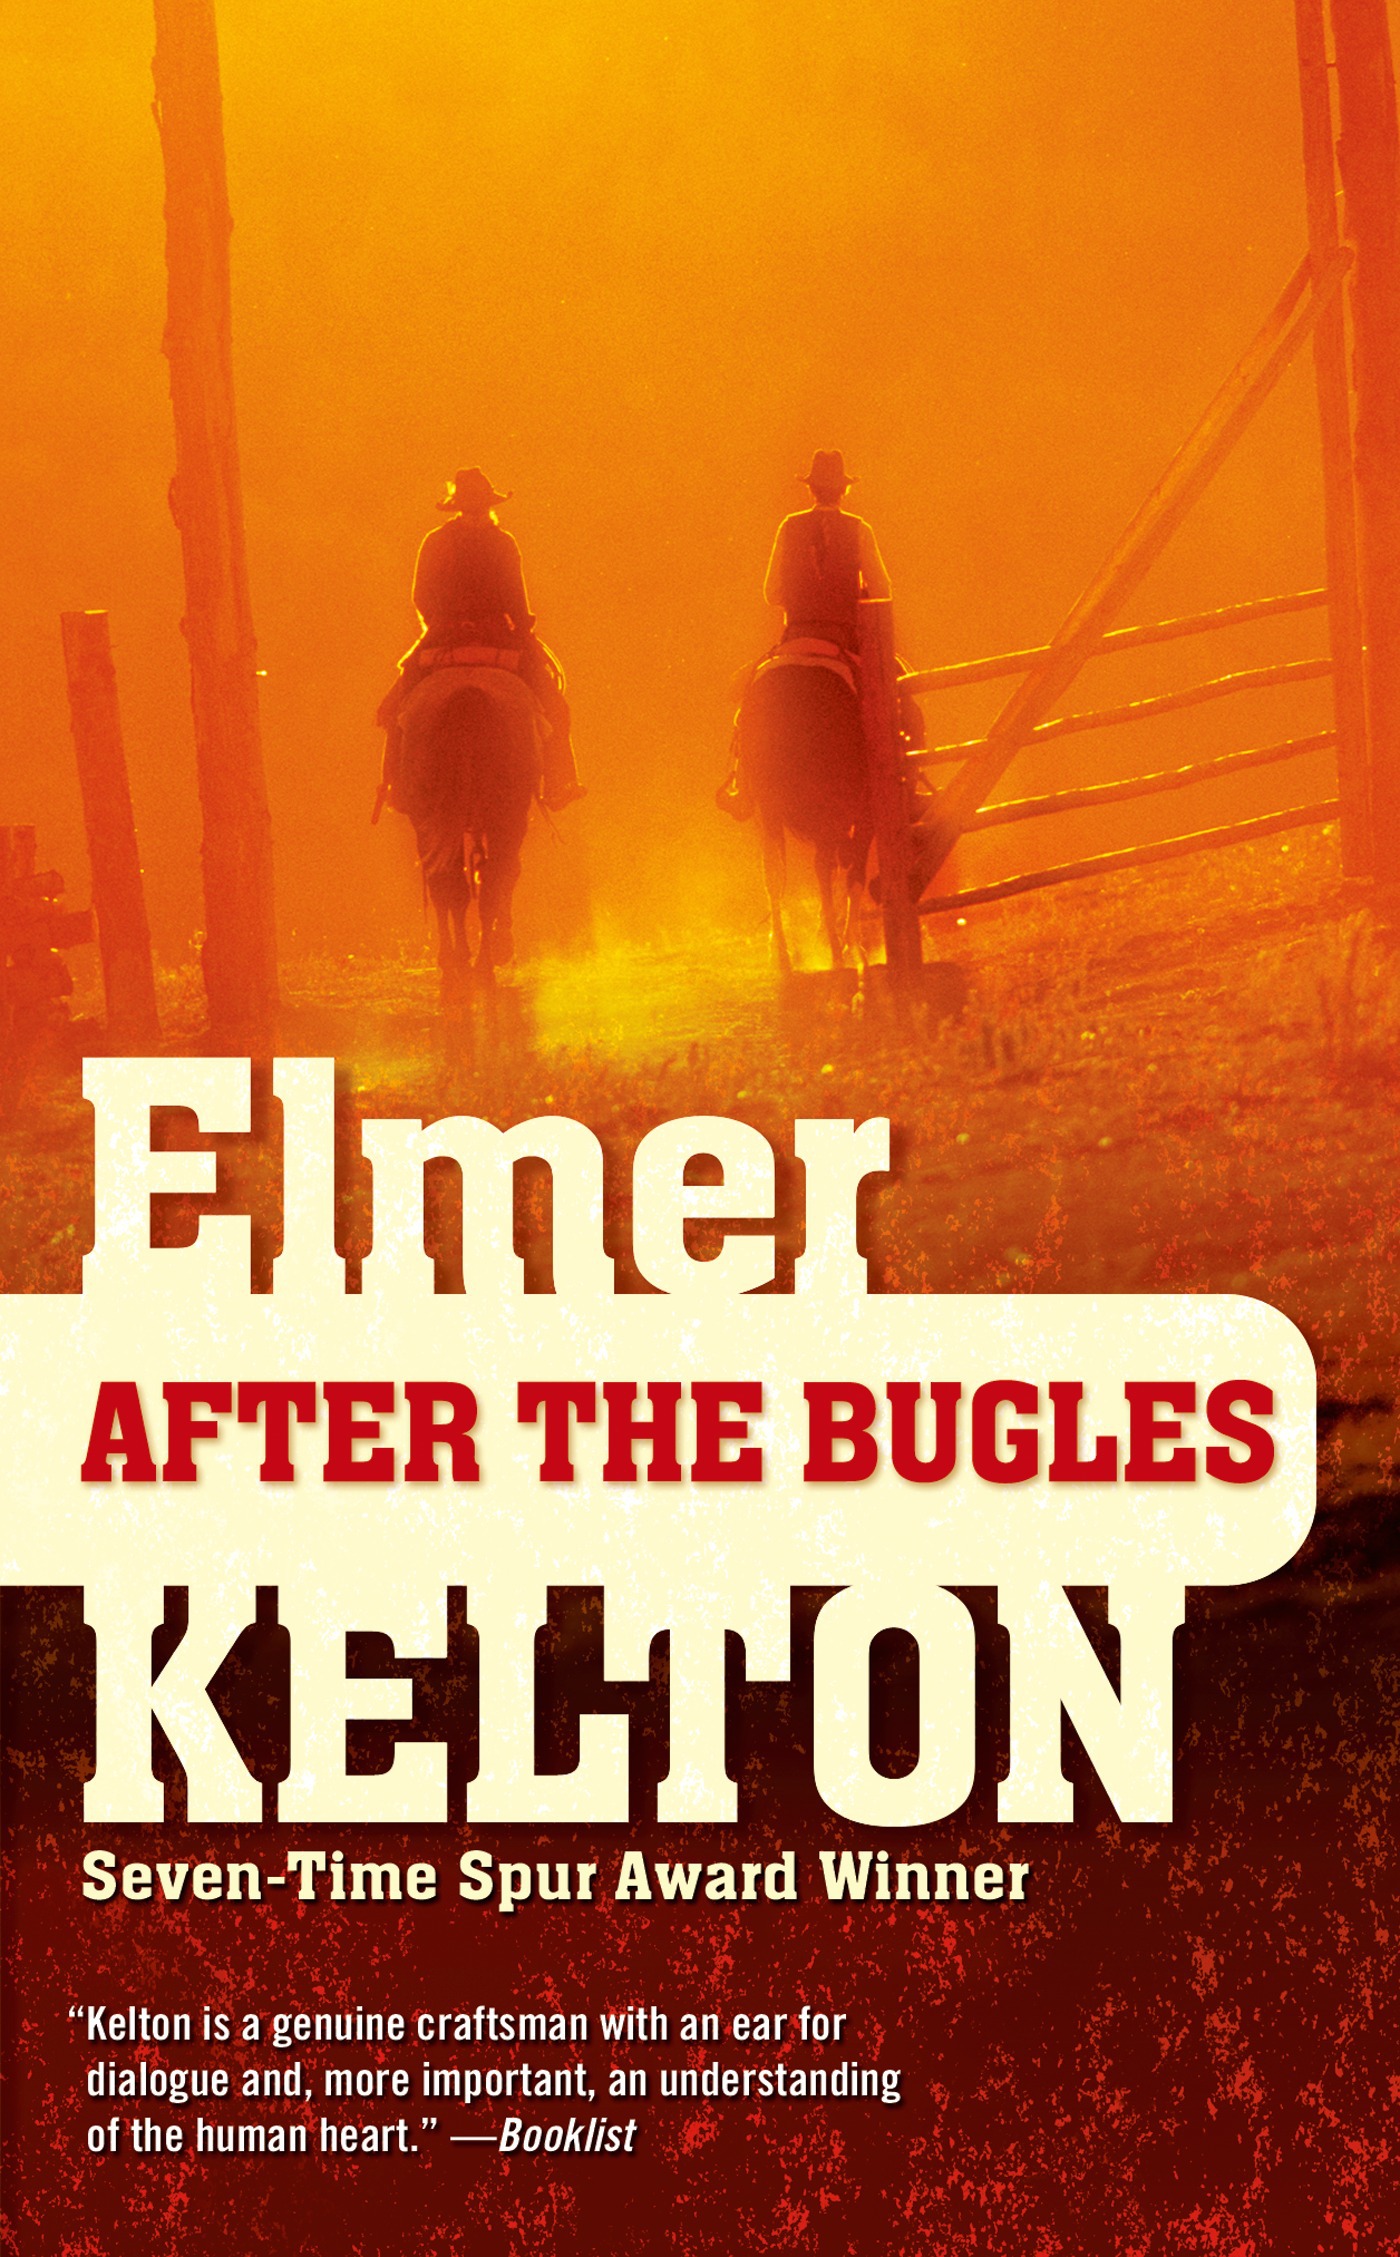 After the Bugles : A Story of the Buckalew Family by Elmer Kelton